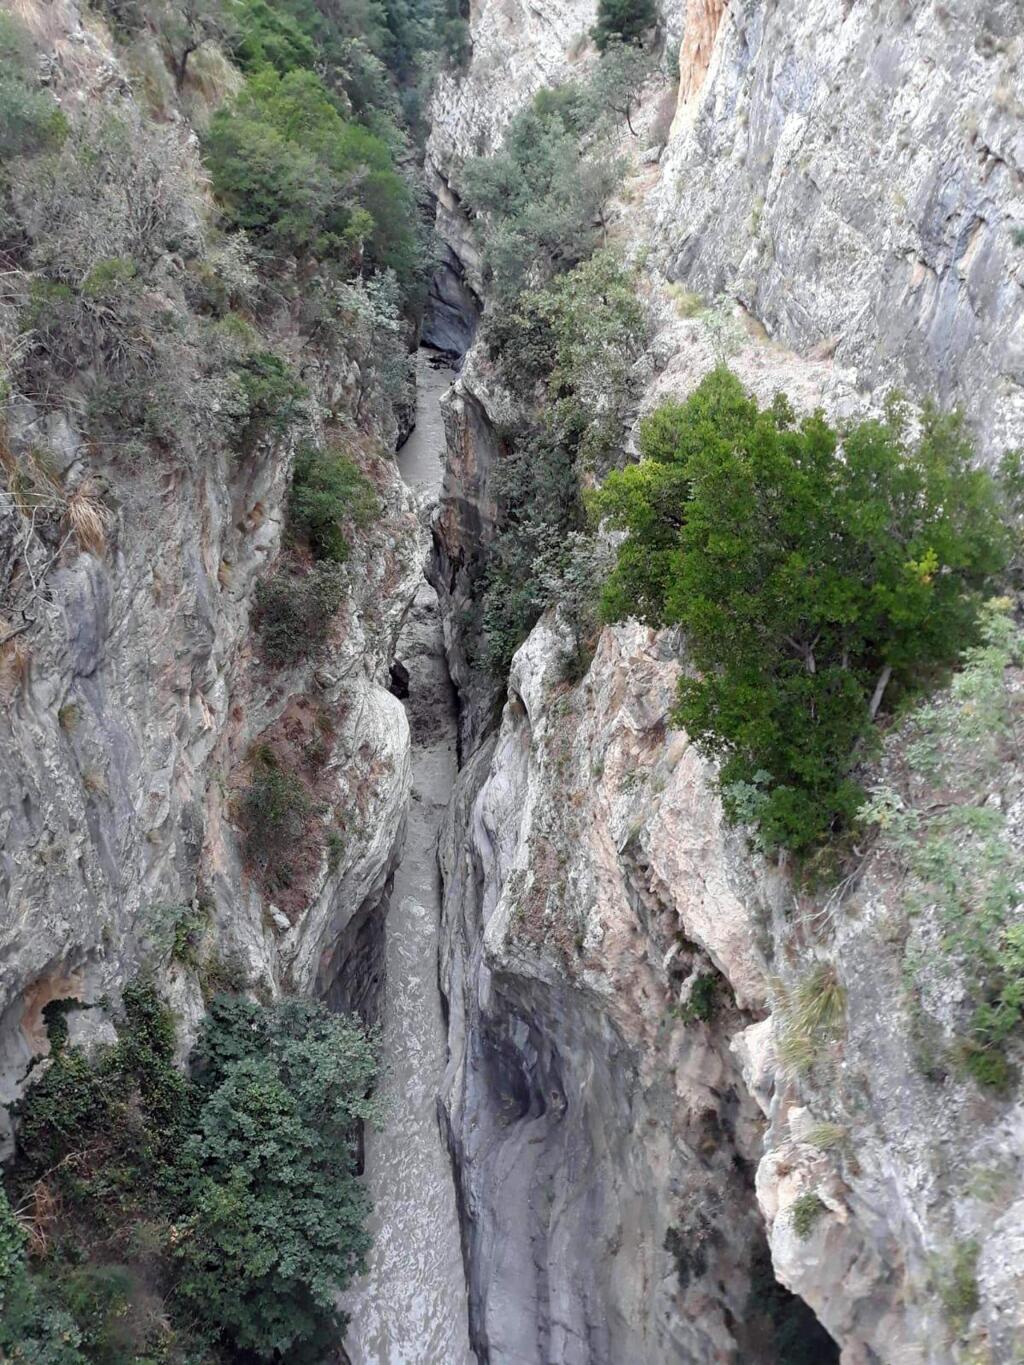 A view of the Raganello Gorge in Civita, Italy, Monday, Aug. 20, 2018. Italy's civil protection agency says at least five people have been killed when a rain-swollen river flooded a gorge in the southern region of Calabria. The Italian news agency ANSA reported Monday that 12 people were brought to safety in the flash flood. It was unclear how many people were missing. The flood hit a group of hikers in the Raganello Gorge. (Antonio Iannicelli/ANSA via AP)